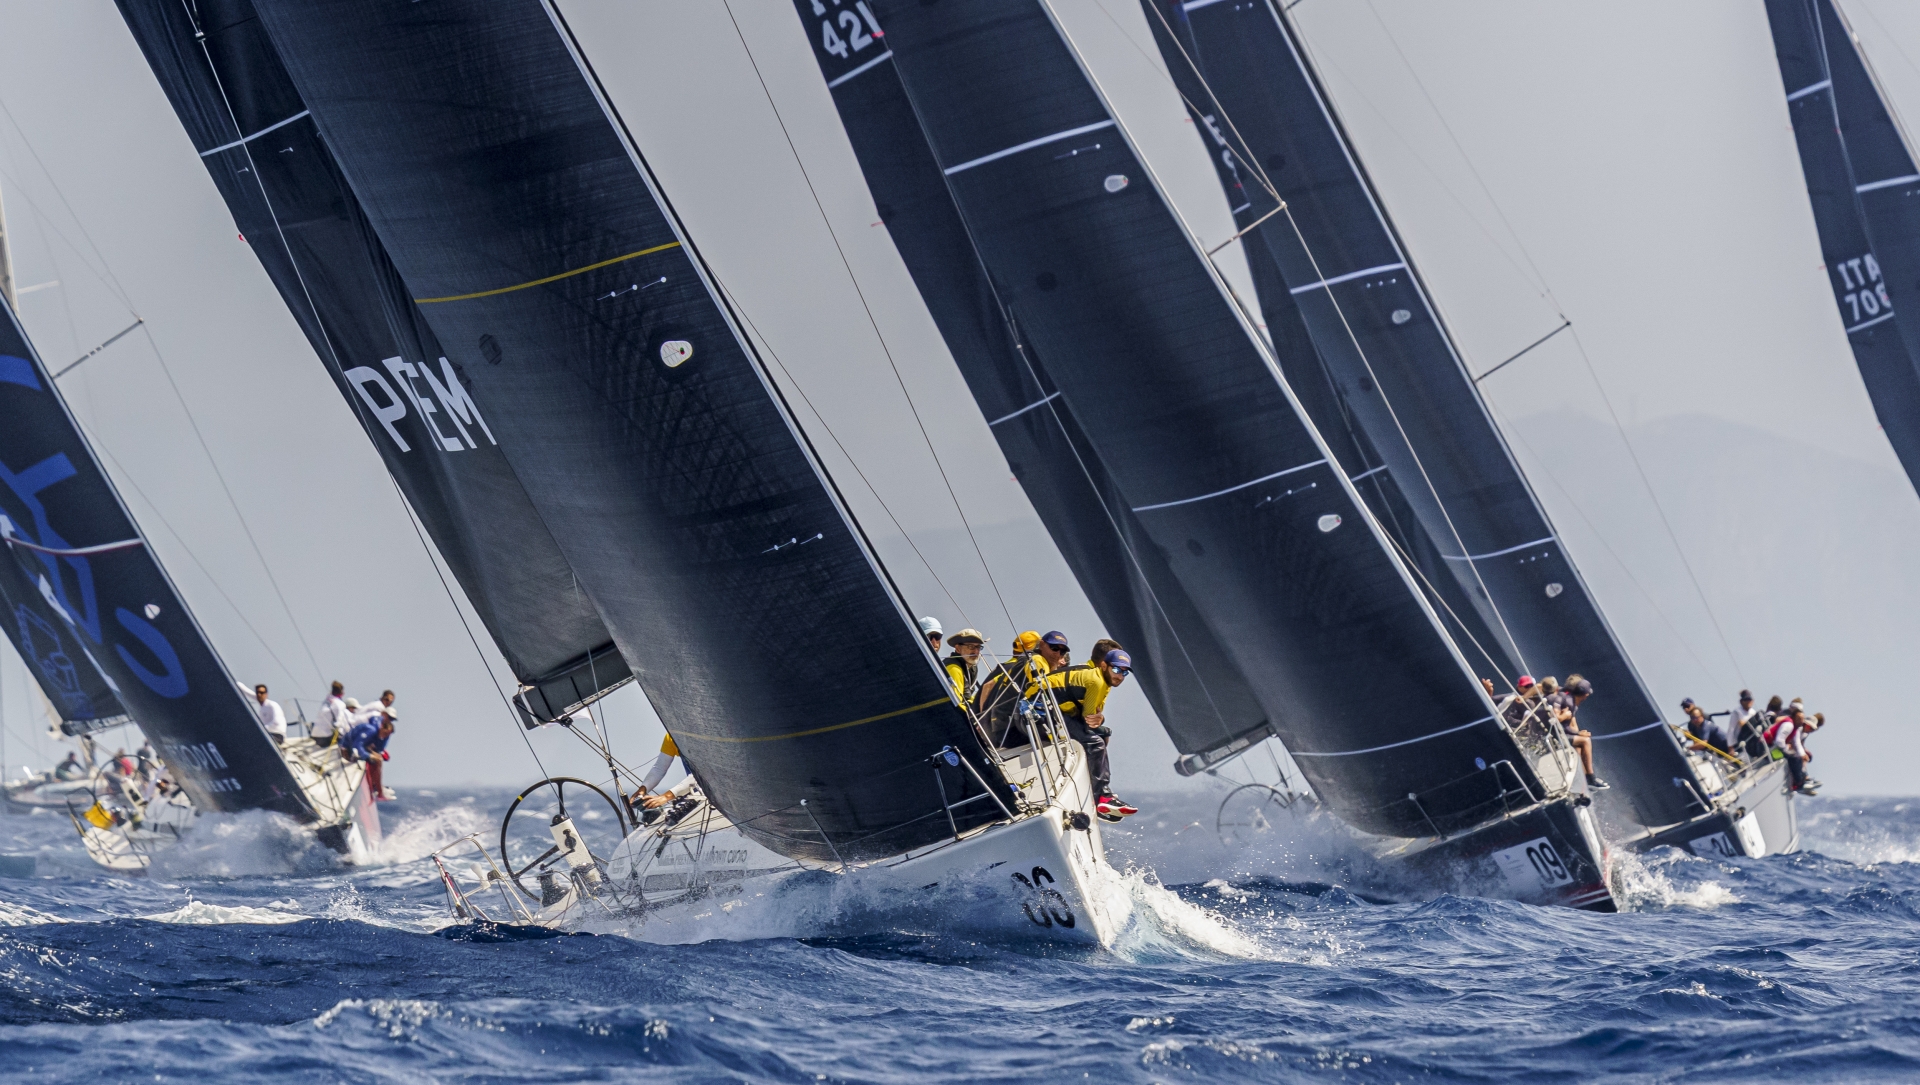 An energized Day 4 at the 2022 ORC World Championship - Press Release - Yacht Club Costa Smeralda